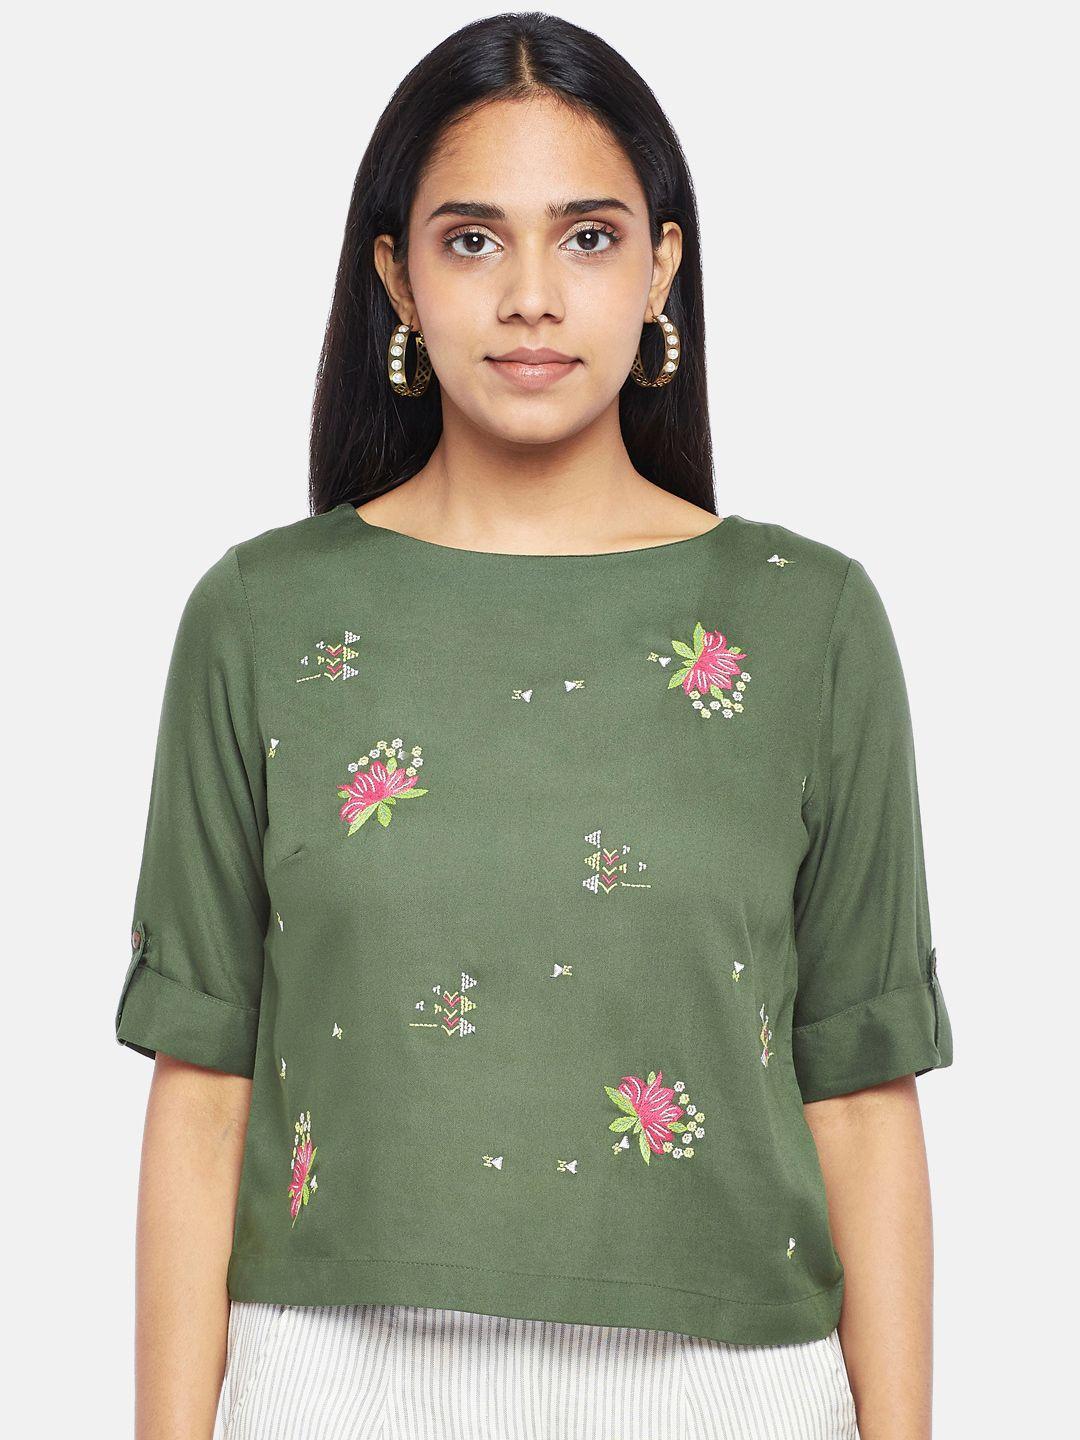 akkriti by pantaloons olive green floral embellished roll-up sleeves top